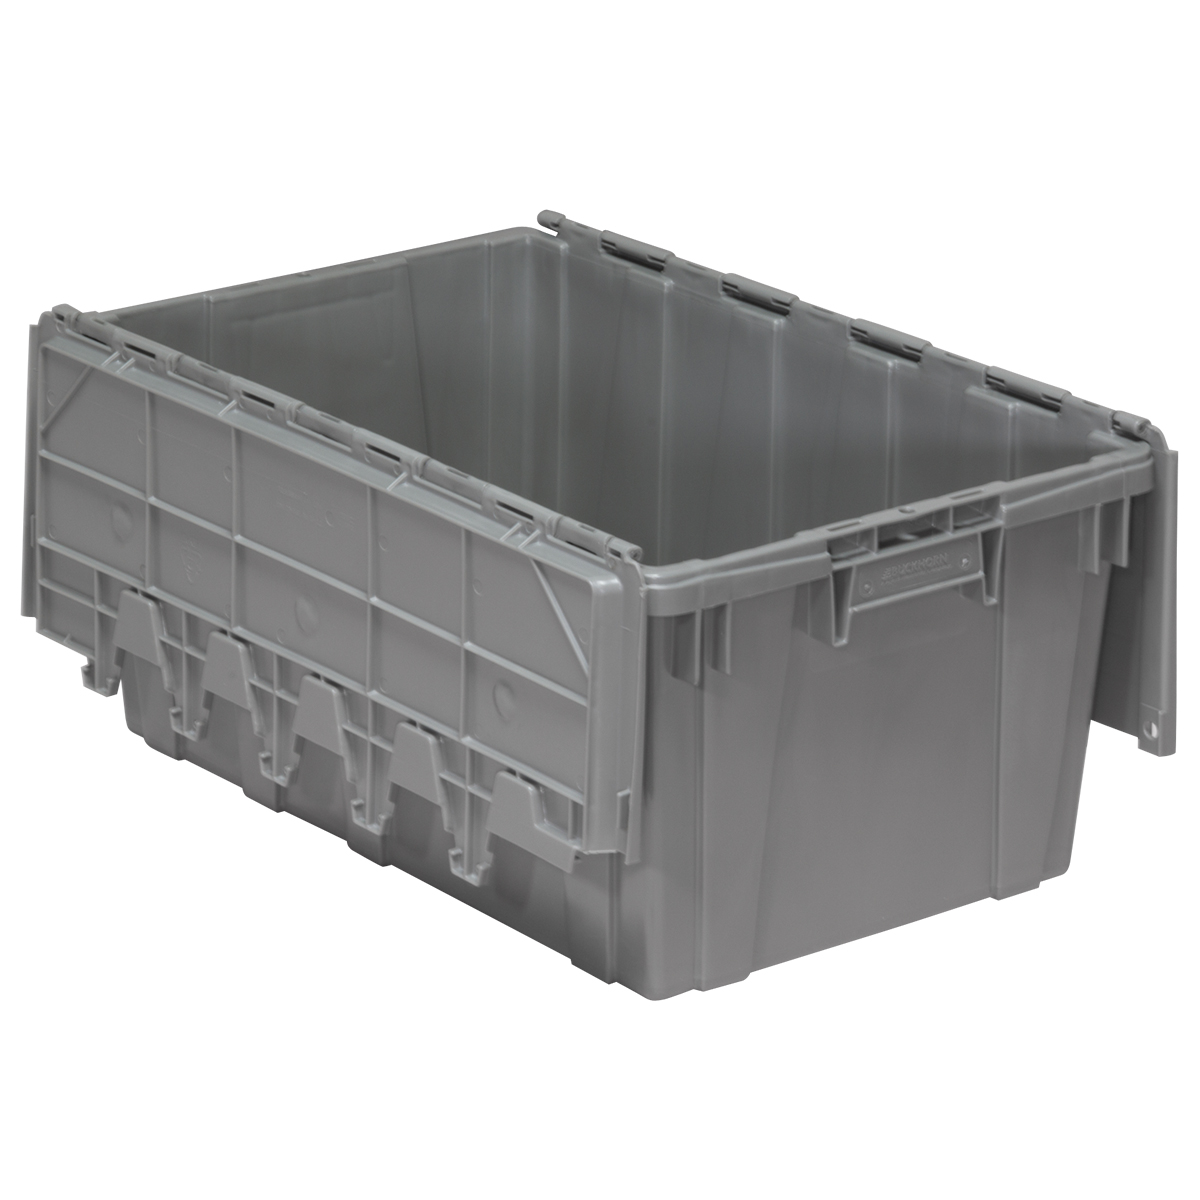 Akro-Mils Attached Lid Containers, Flip Totes, Plastic Storage Bins